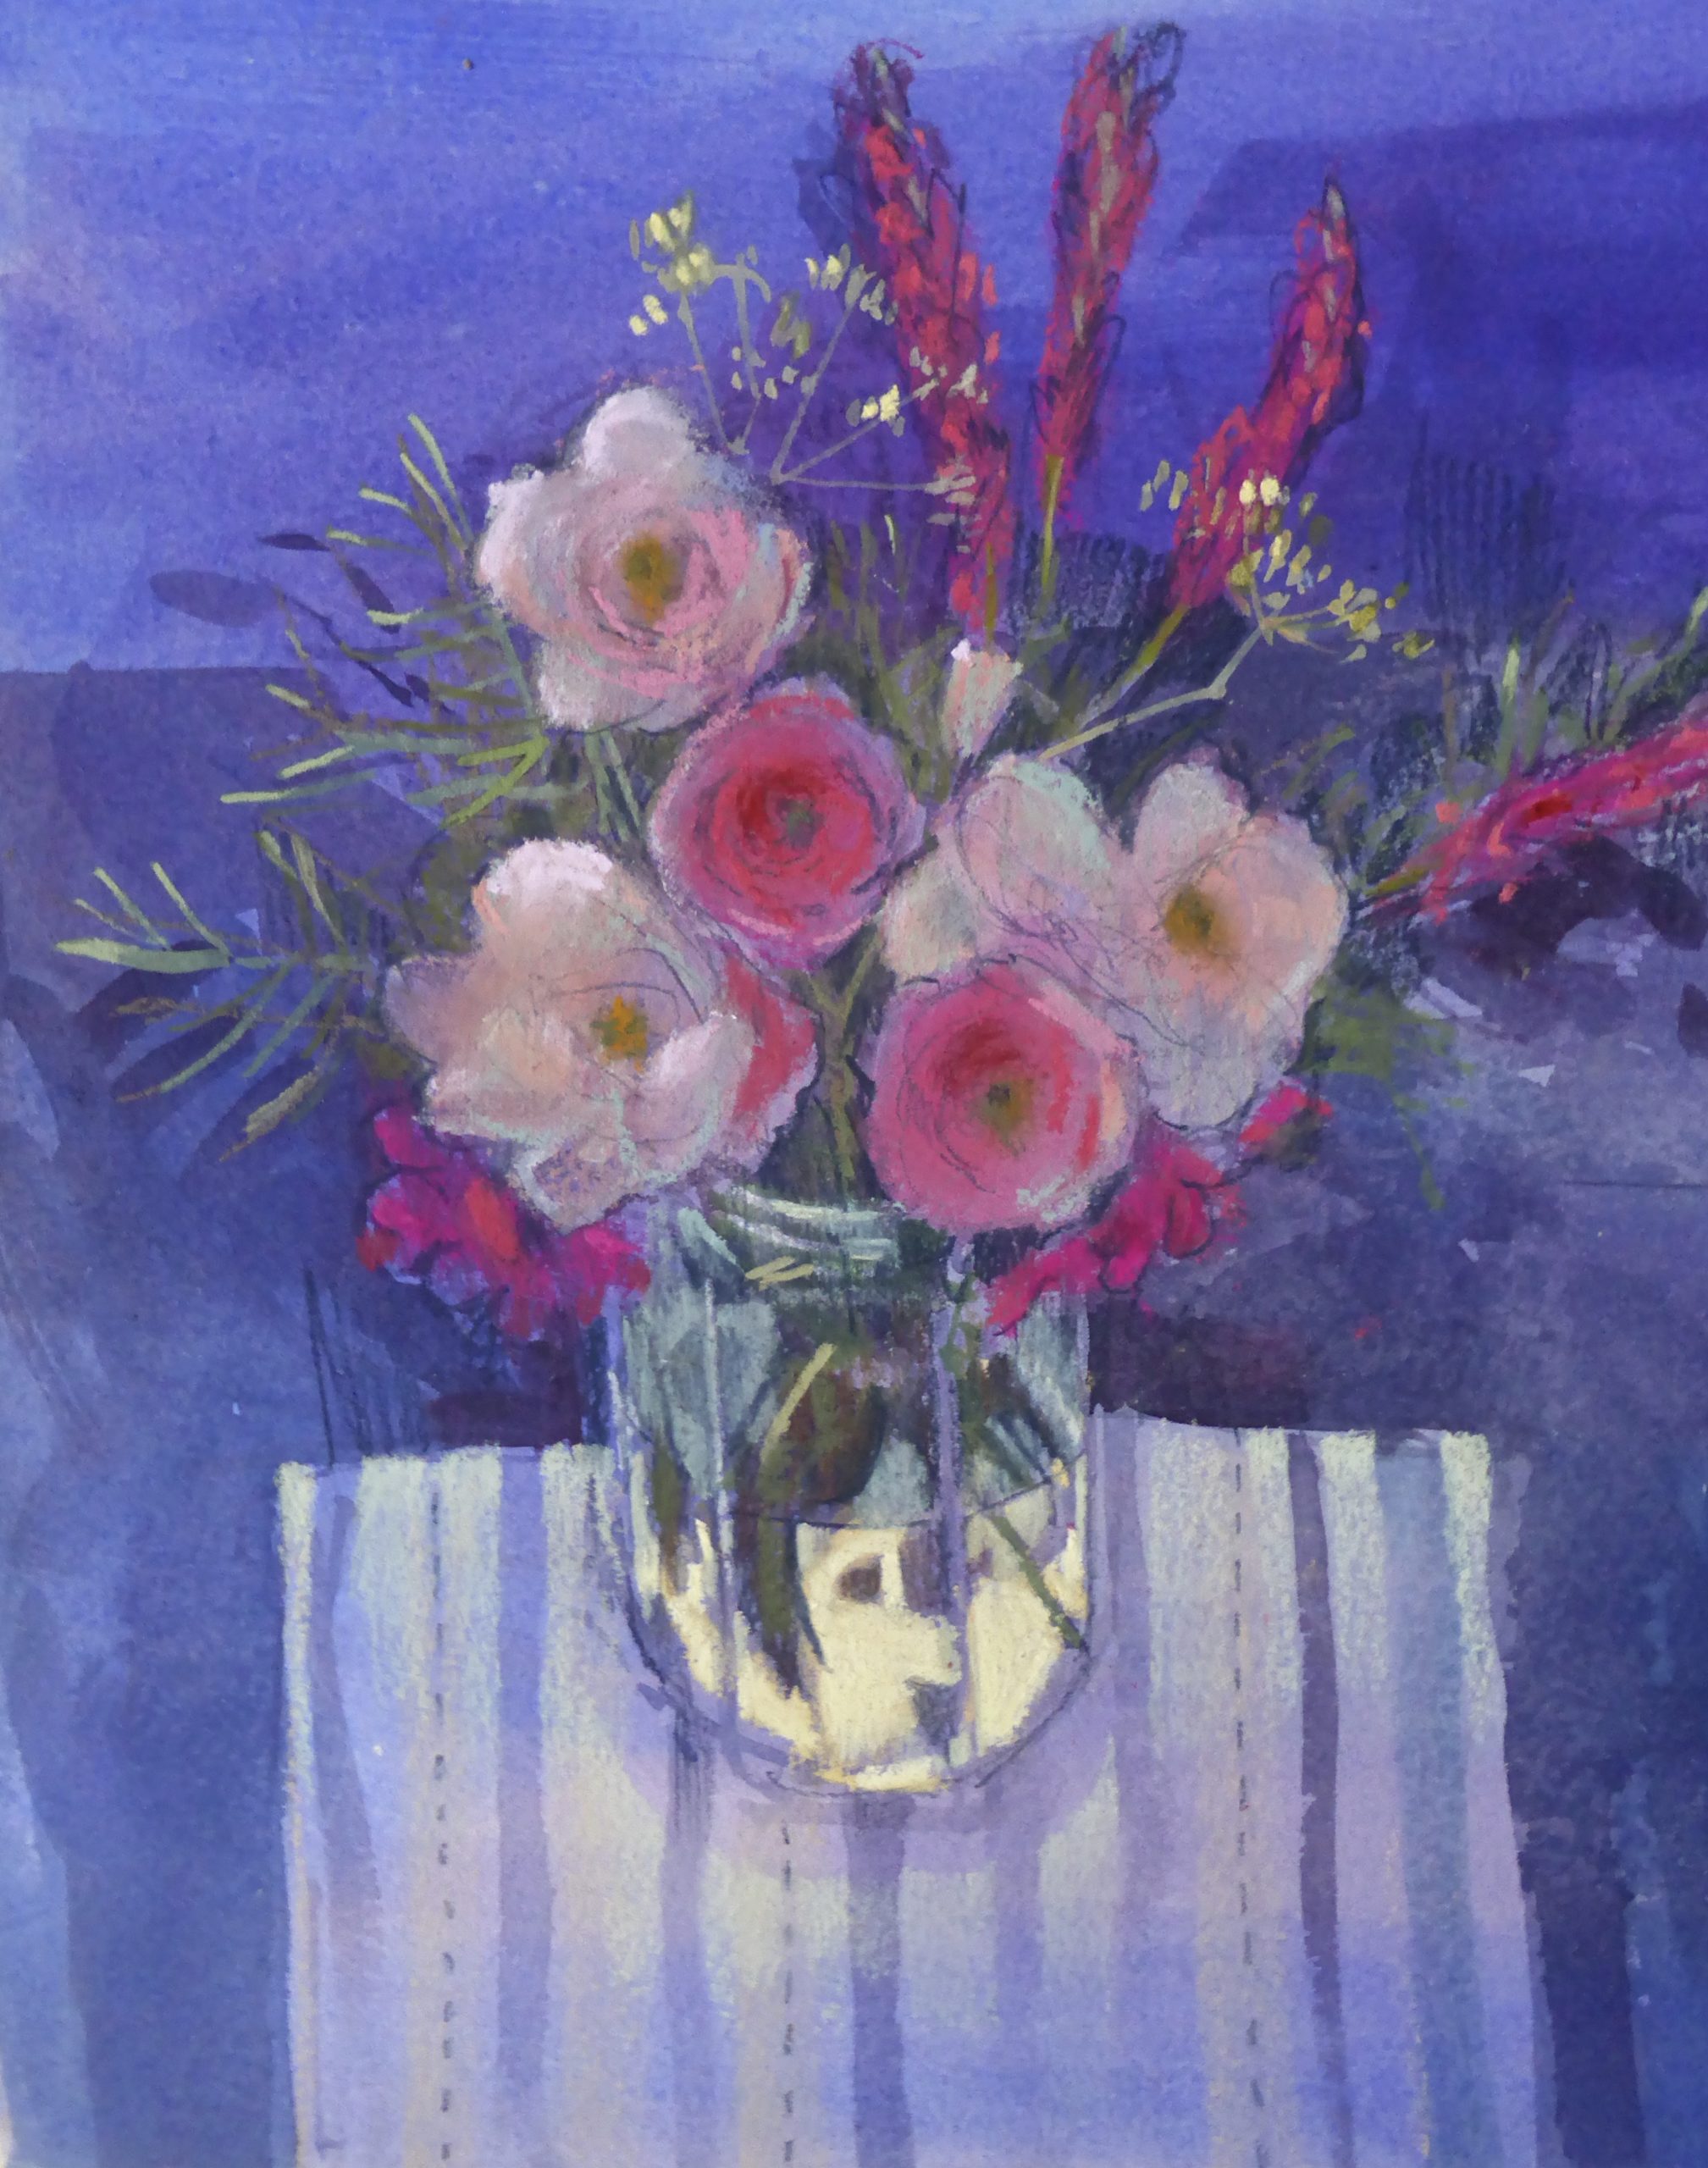 Colour of paper: Felicity House, "Flowers in a Jar," watercolour and pastel on Somerset Velvet paper, 26 x 20 cm (10 x 8 in). Paint your own paper - here I used an unusual blue/purple colour 